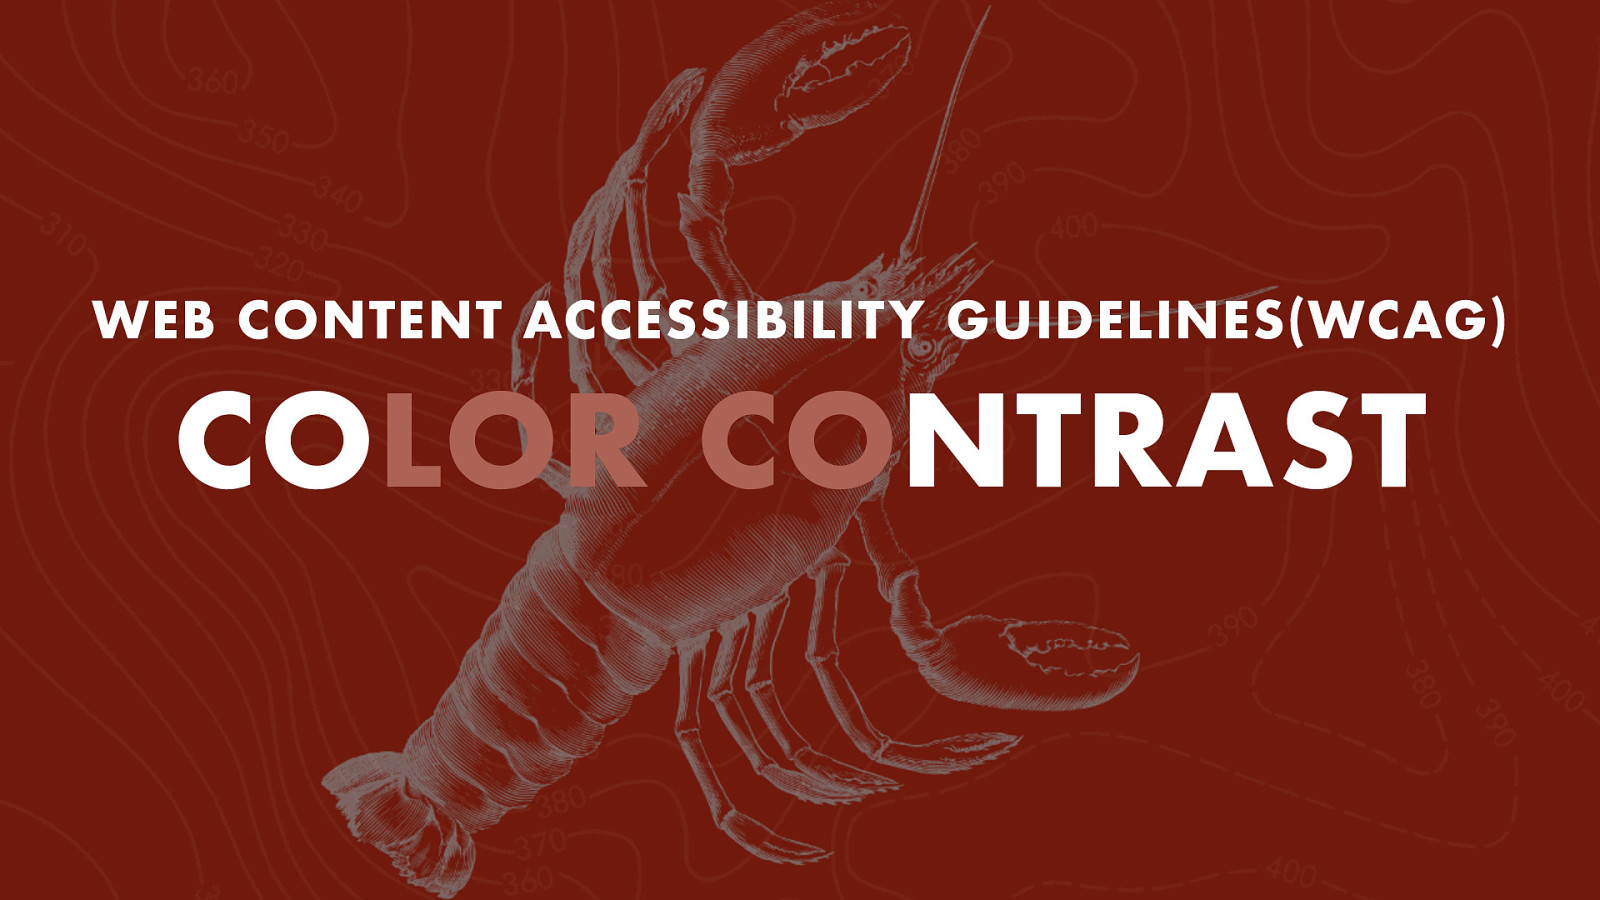 Web Content Accessibility Guidelines and Color Contrast